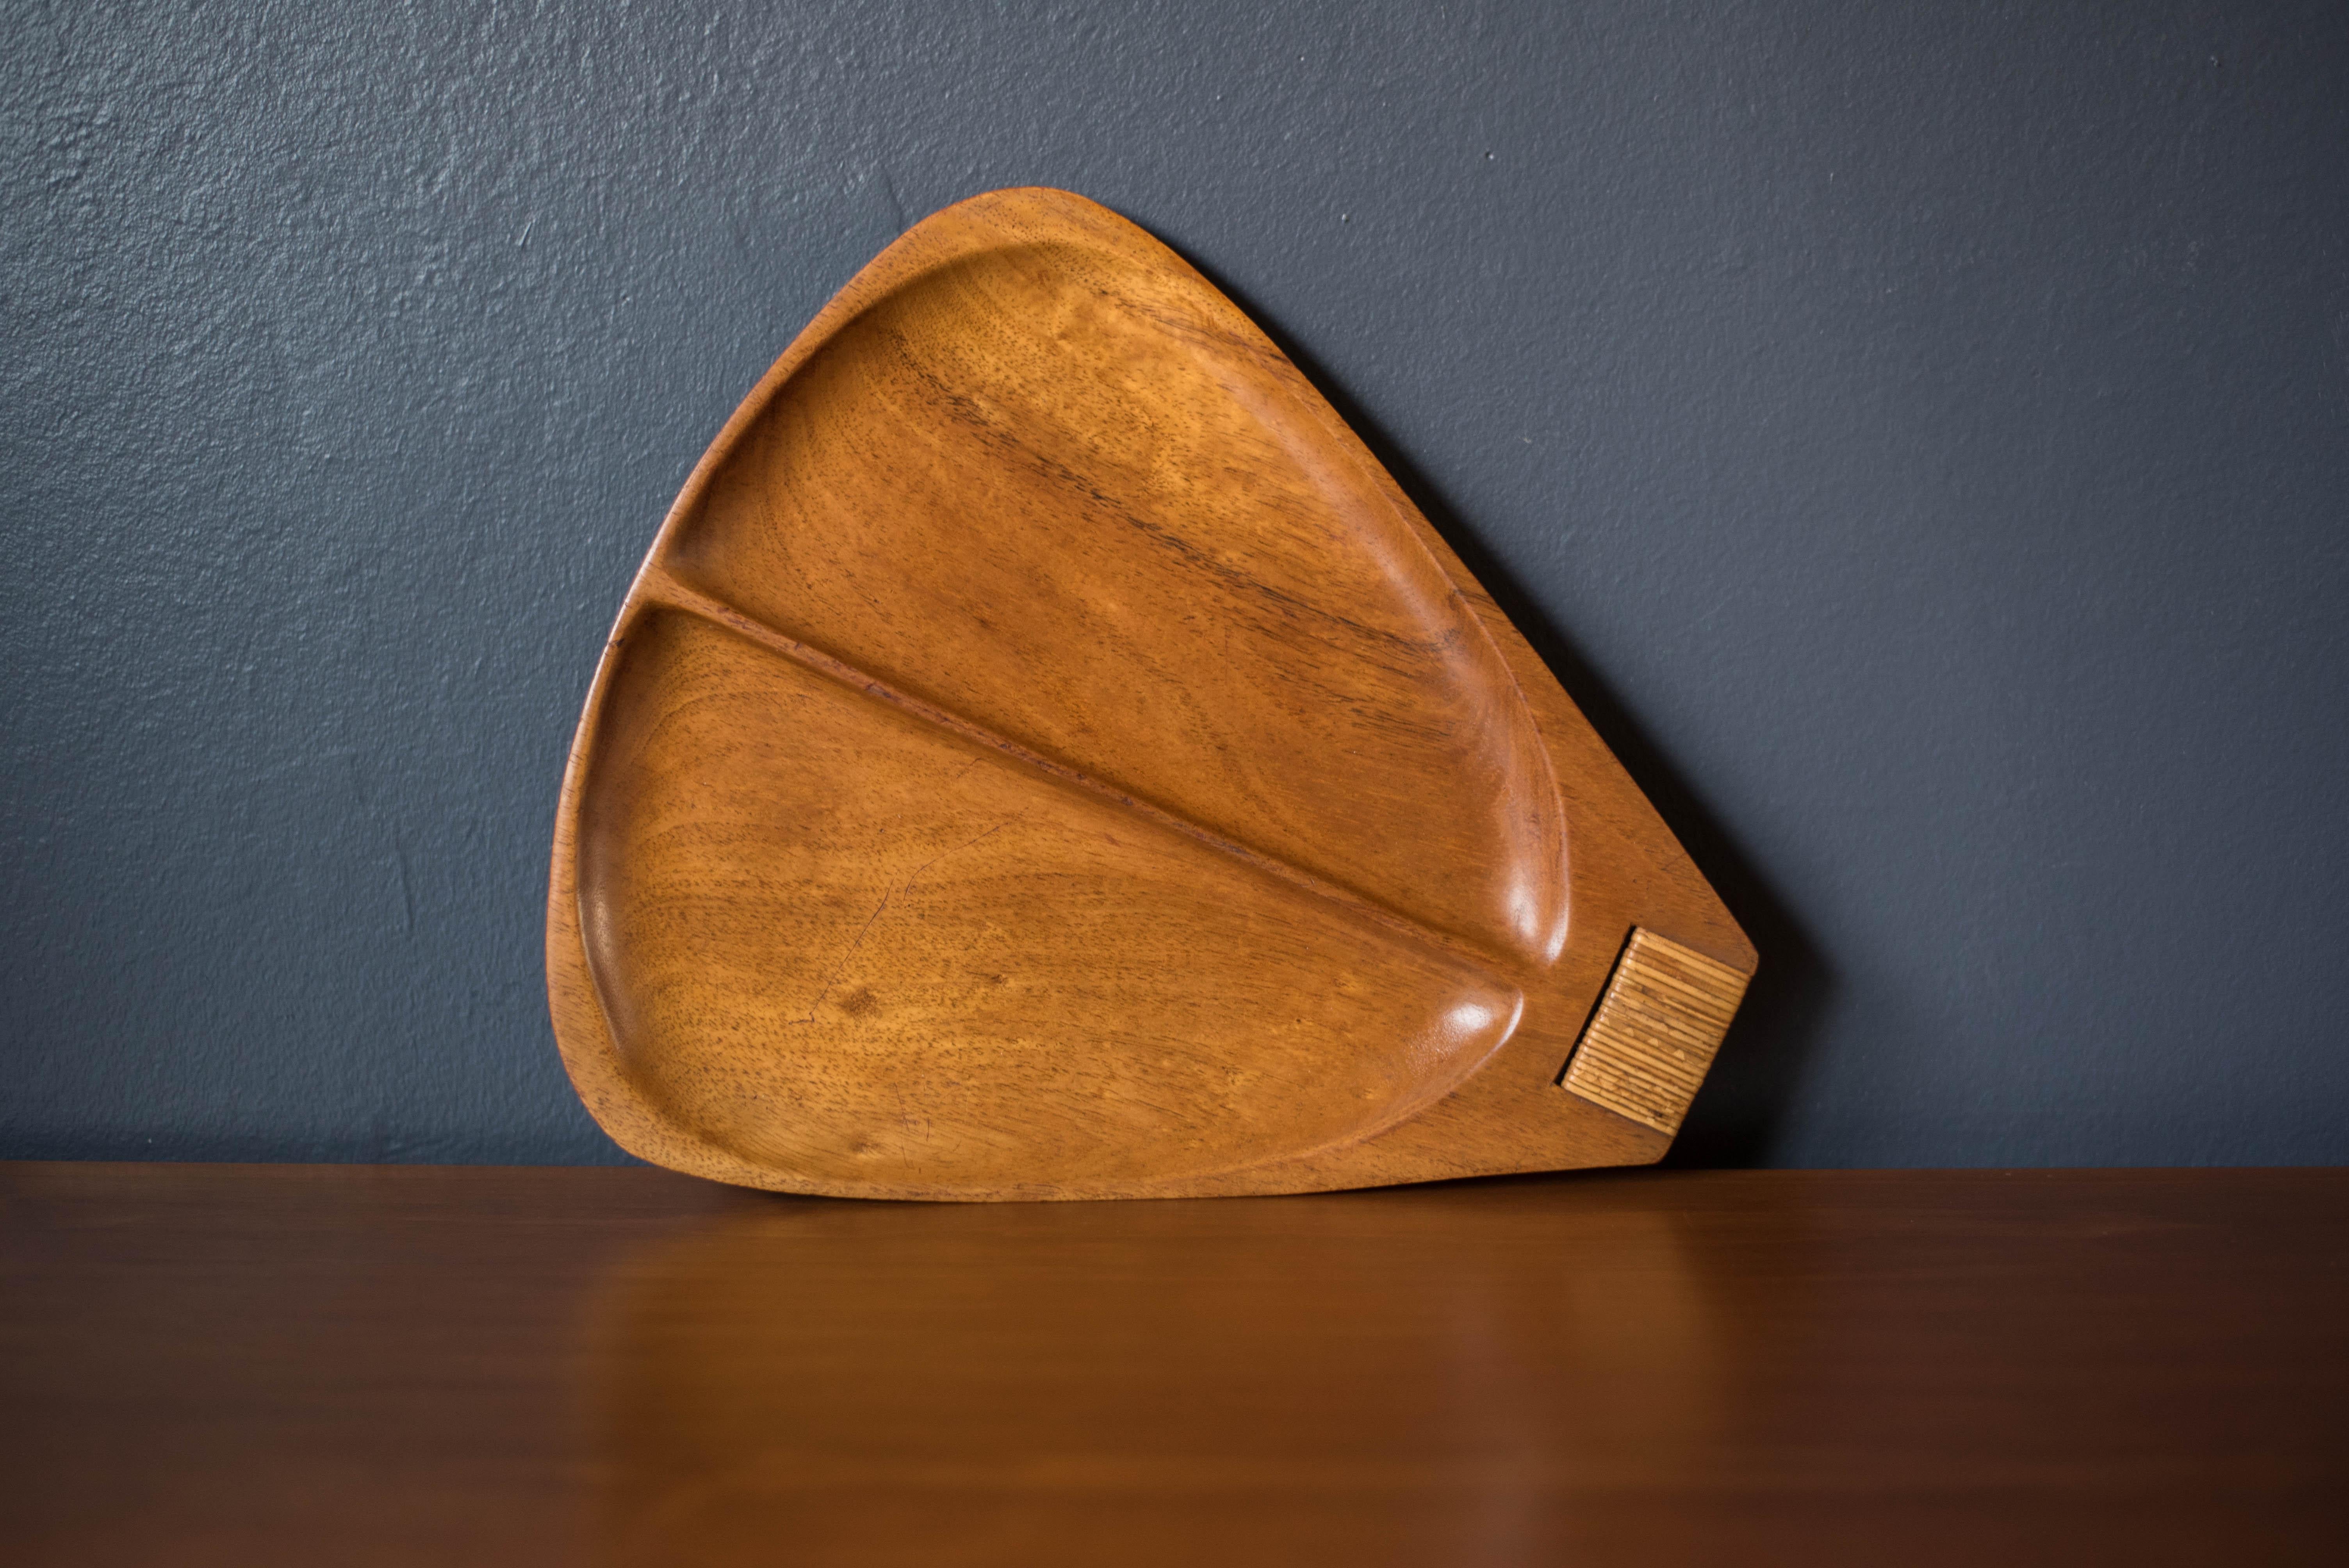 Vintage serving platter tray designed by Arthur Umanoff for Raymor, circa 1960's. This solid piece is made out of Taverneau wood and features a woven reed handle.